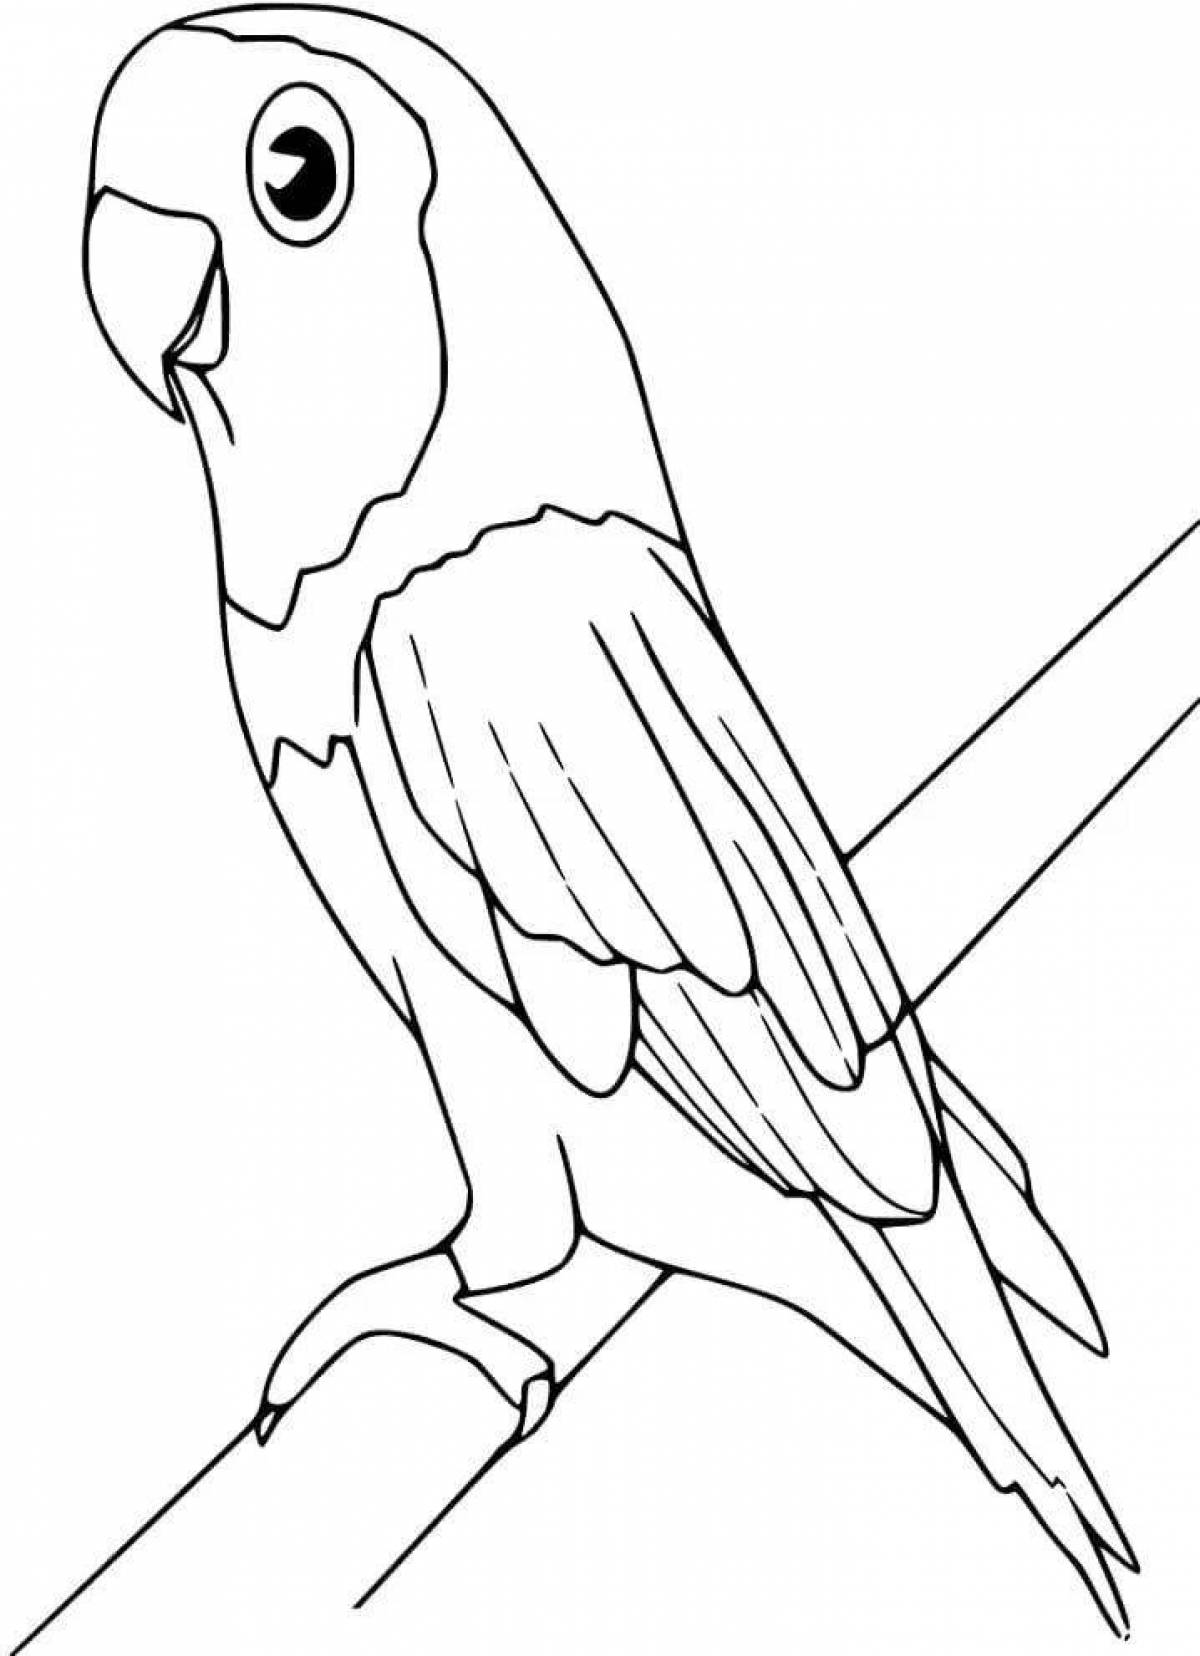 Coloring book shiny parrot